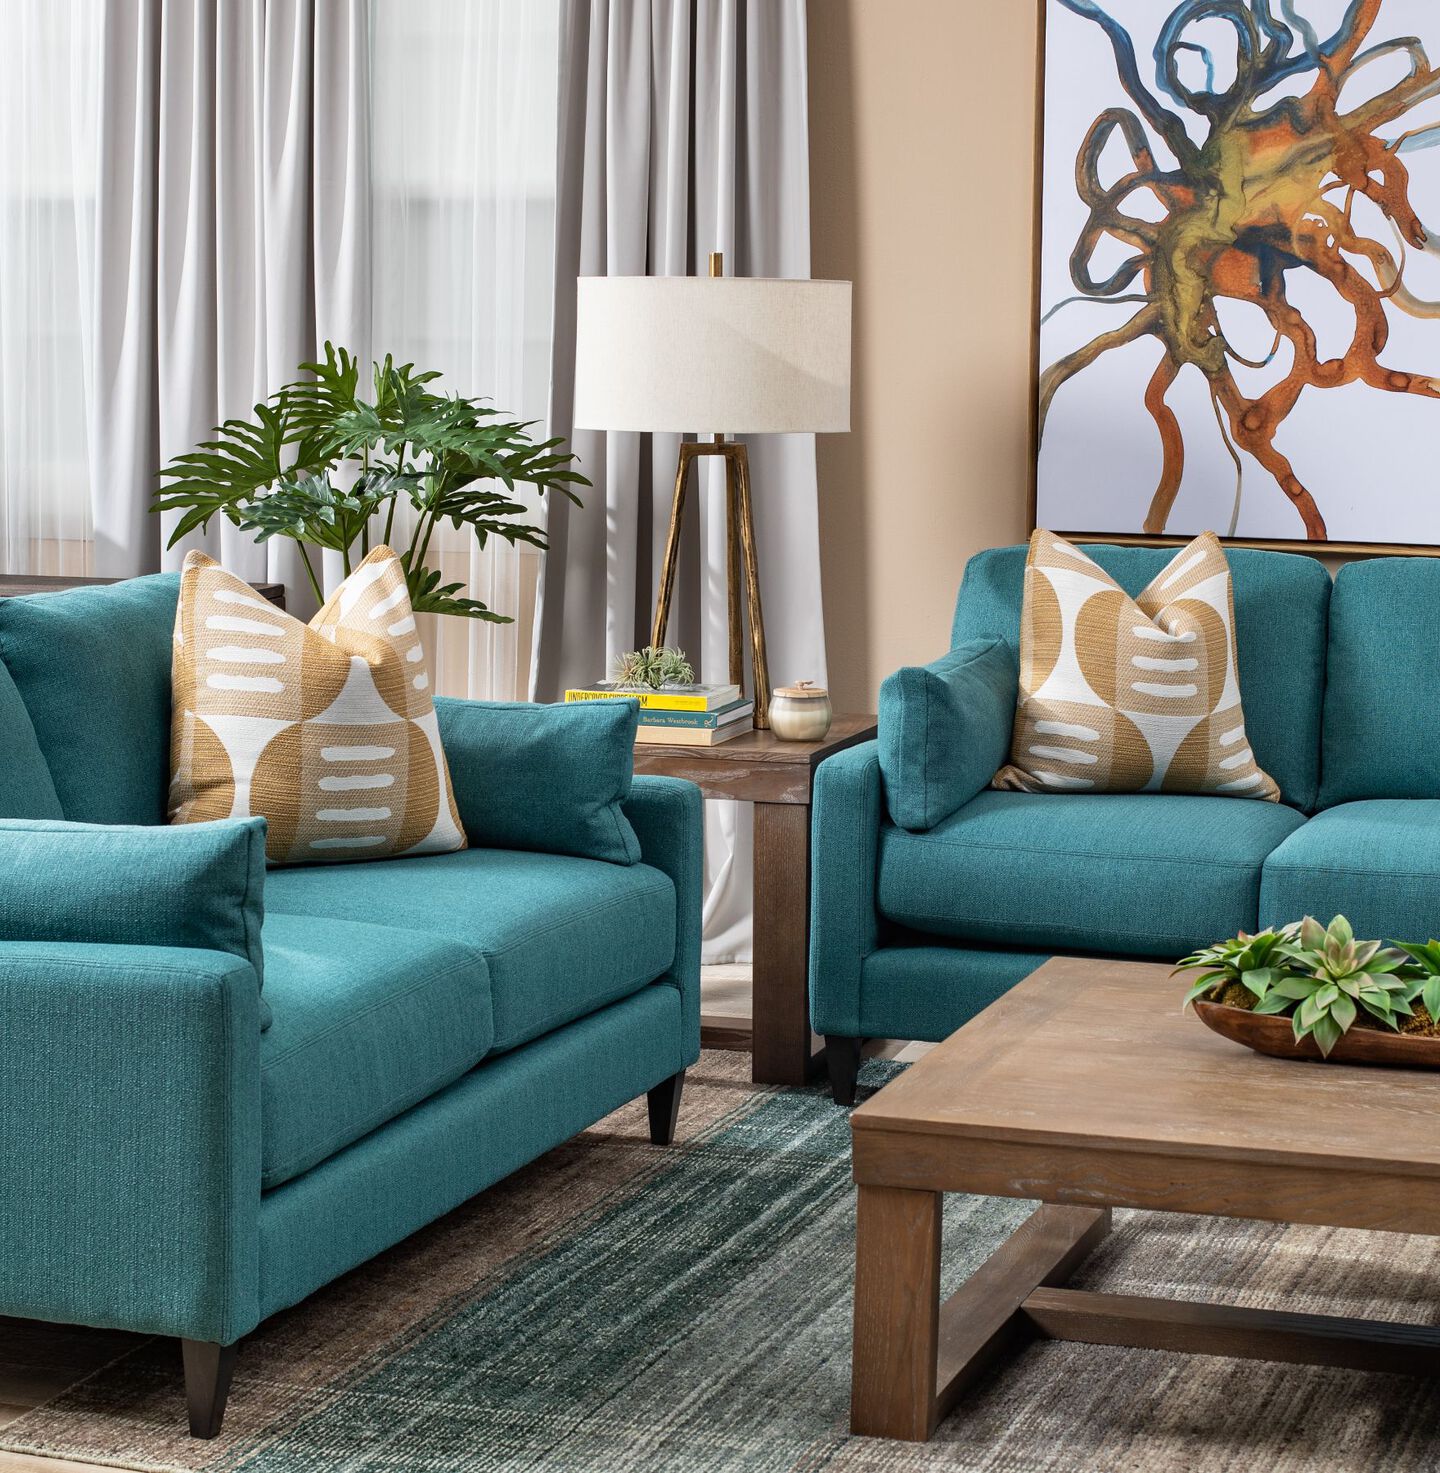 Living room with brown coffee table, a brown side table, and two teal sofas